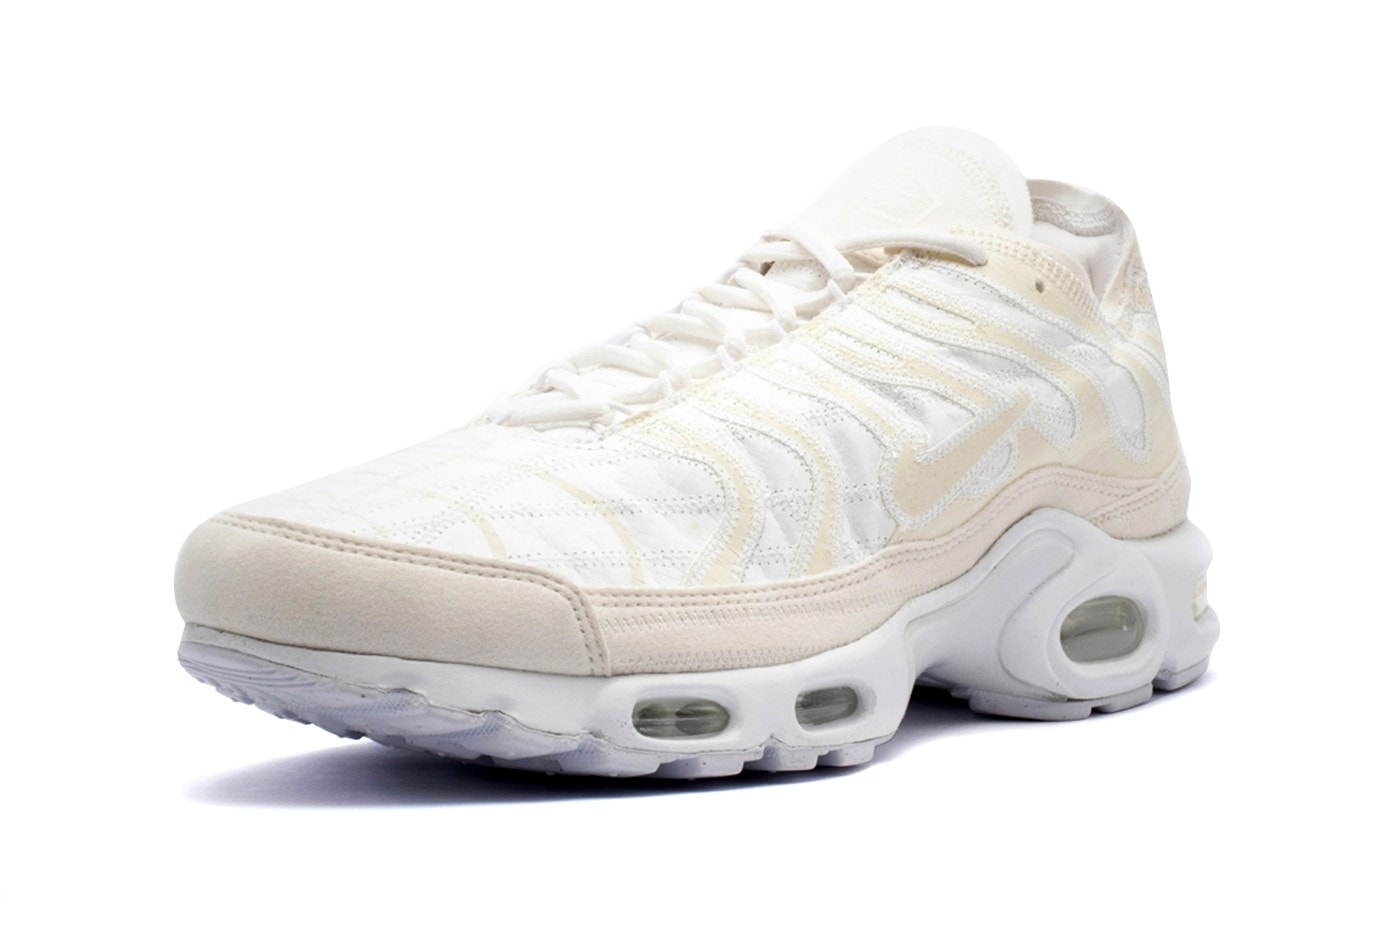 Nike Air Max Plus Deconstructed 全新配色「Beige/White」發佈